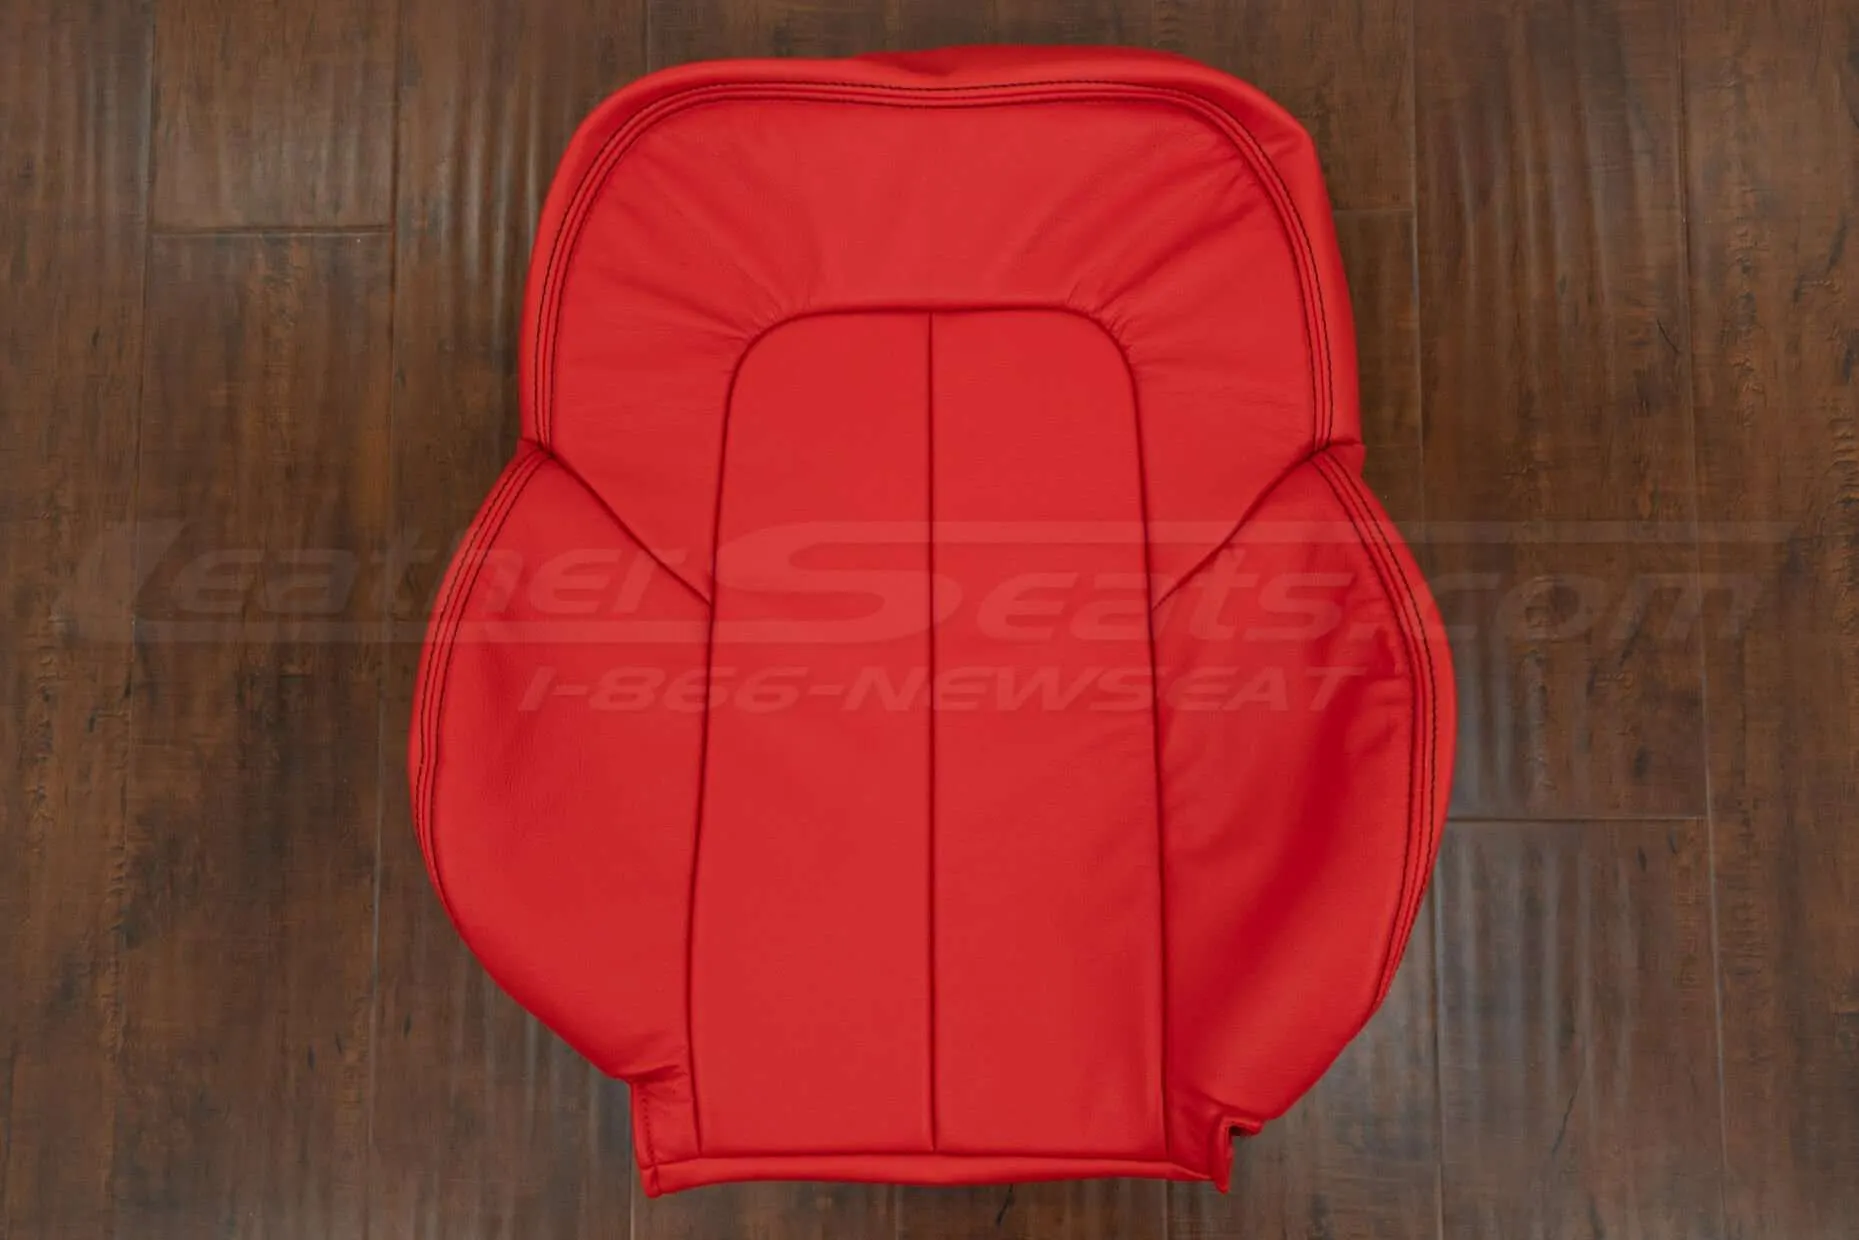 Chrysler Crossfire Front backrest upholstery in Bright Red with Black stitching